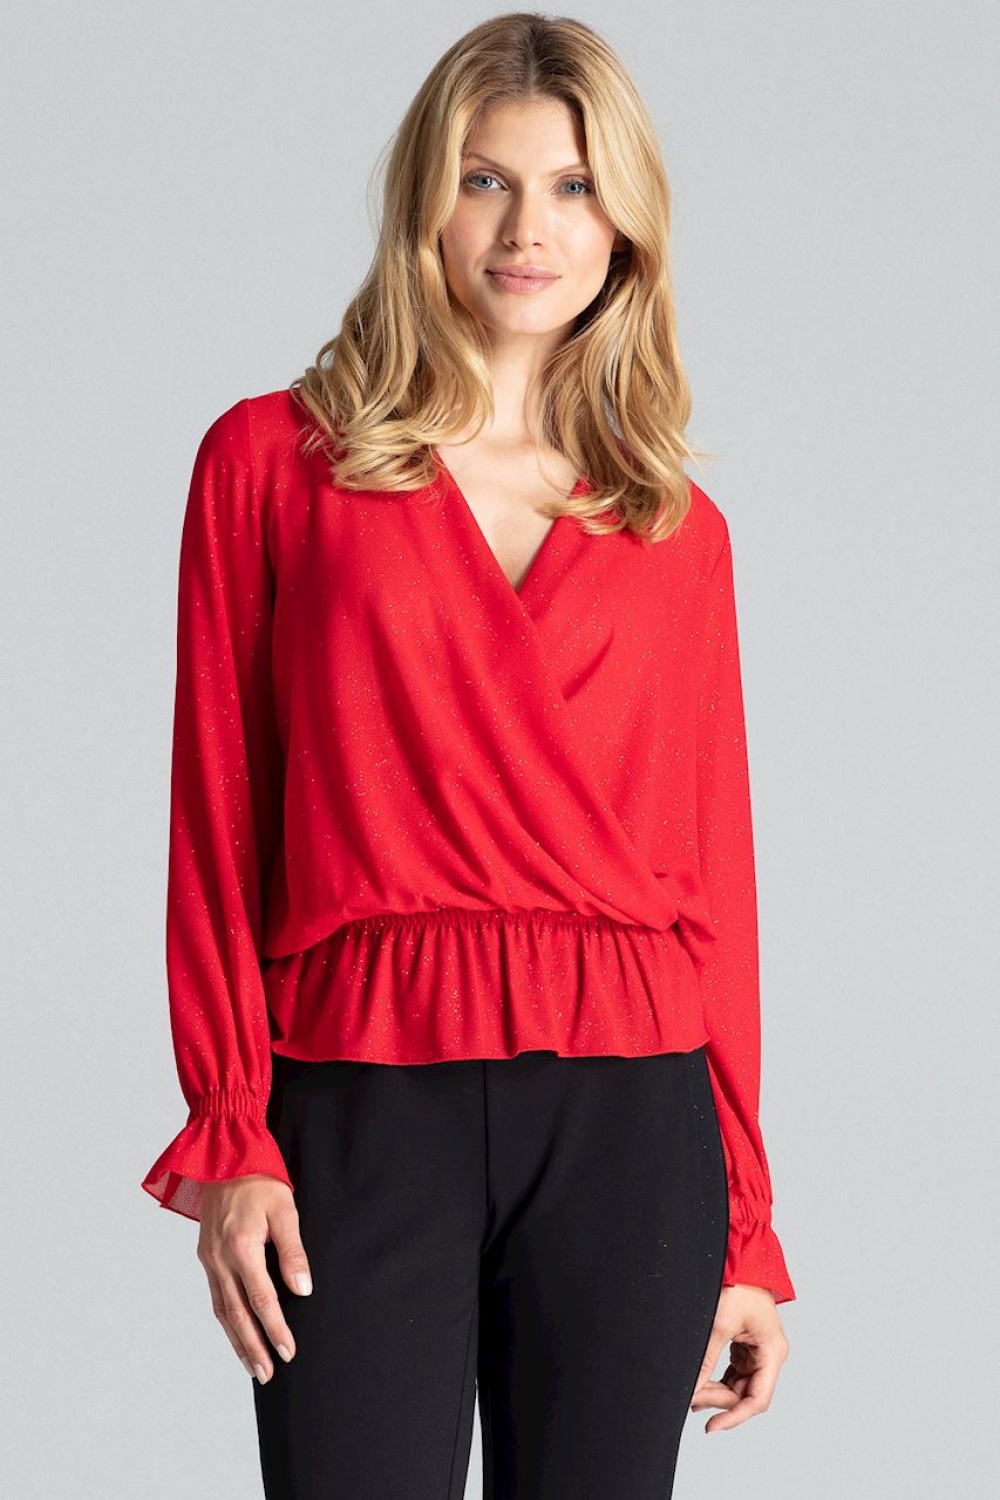  Blouse model 138279 Figl  red